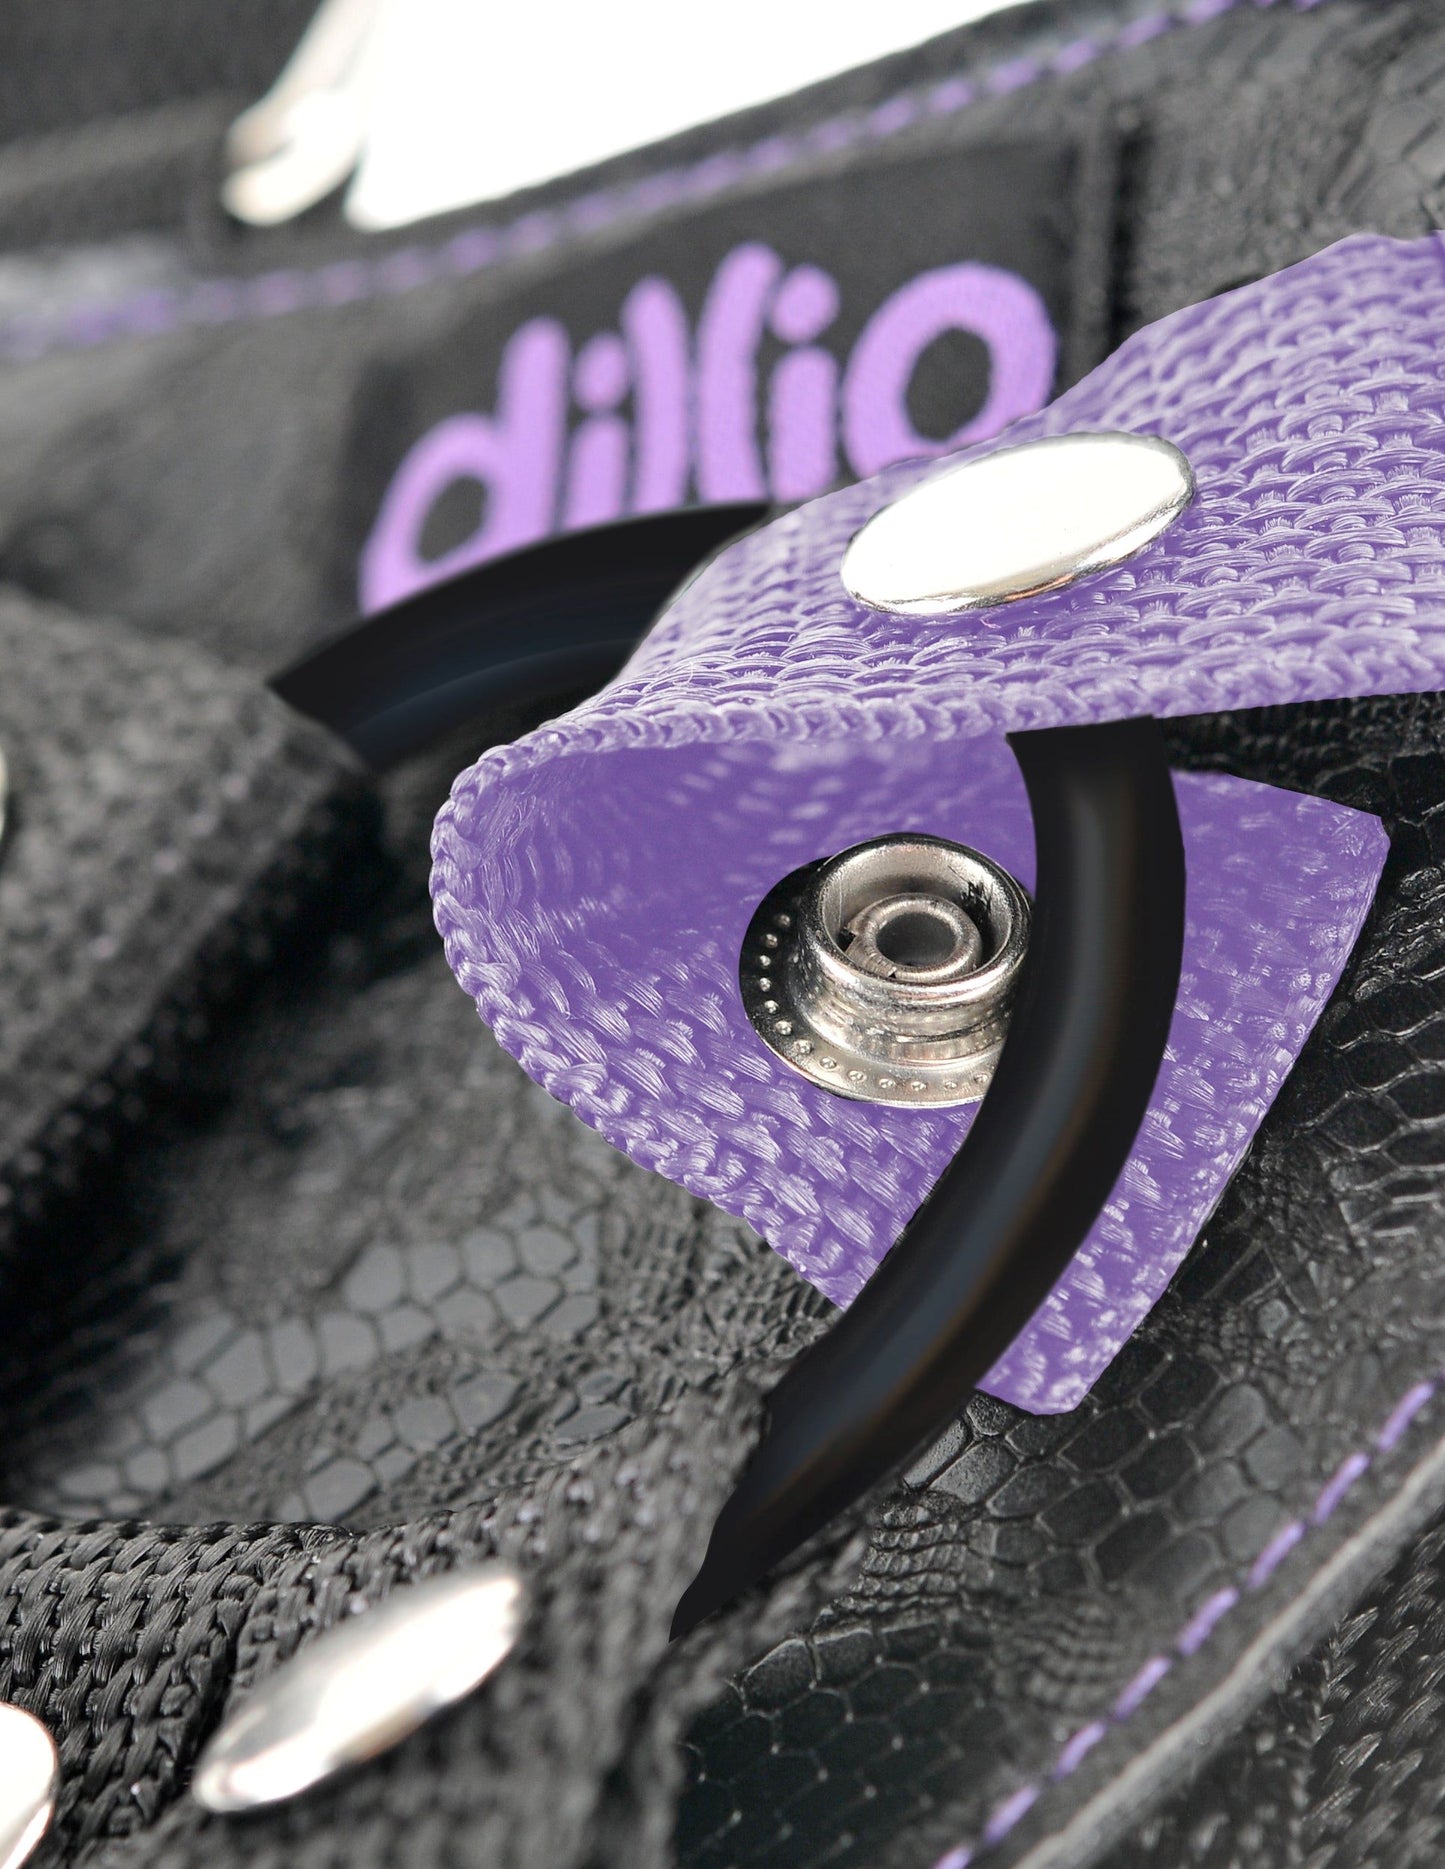 7" Strap On Harness by Dillio